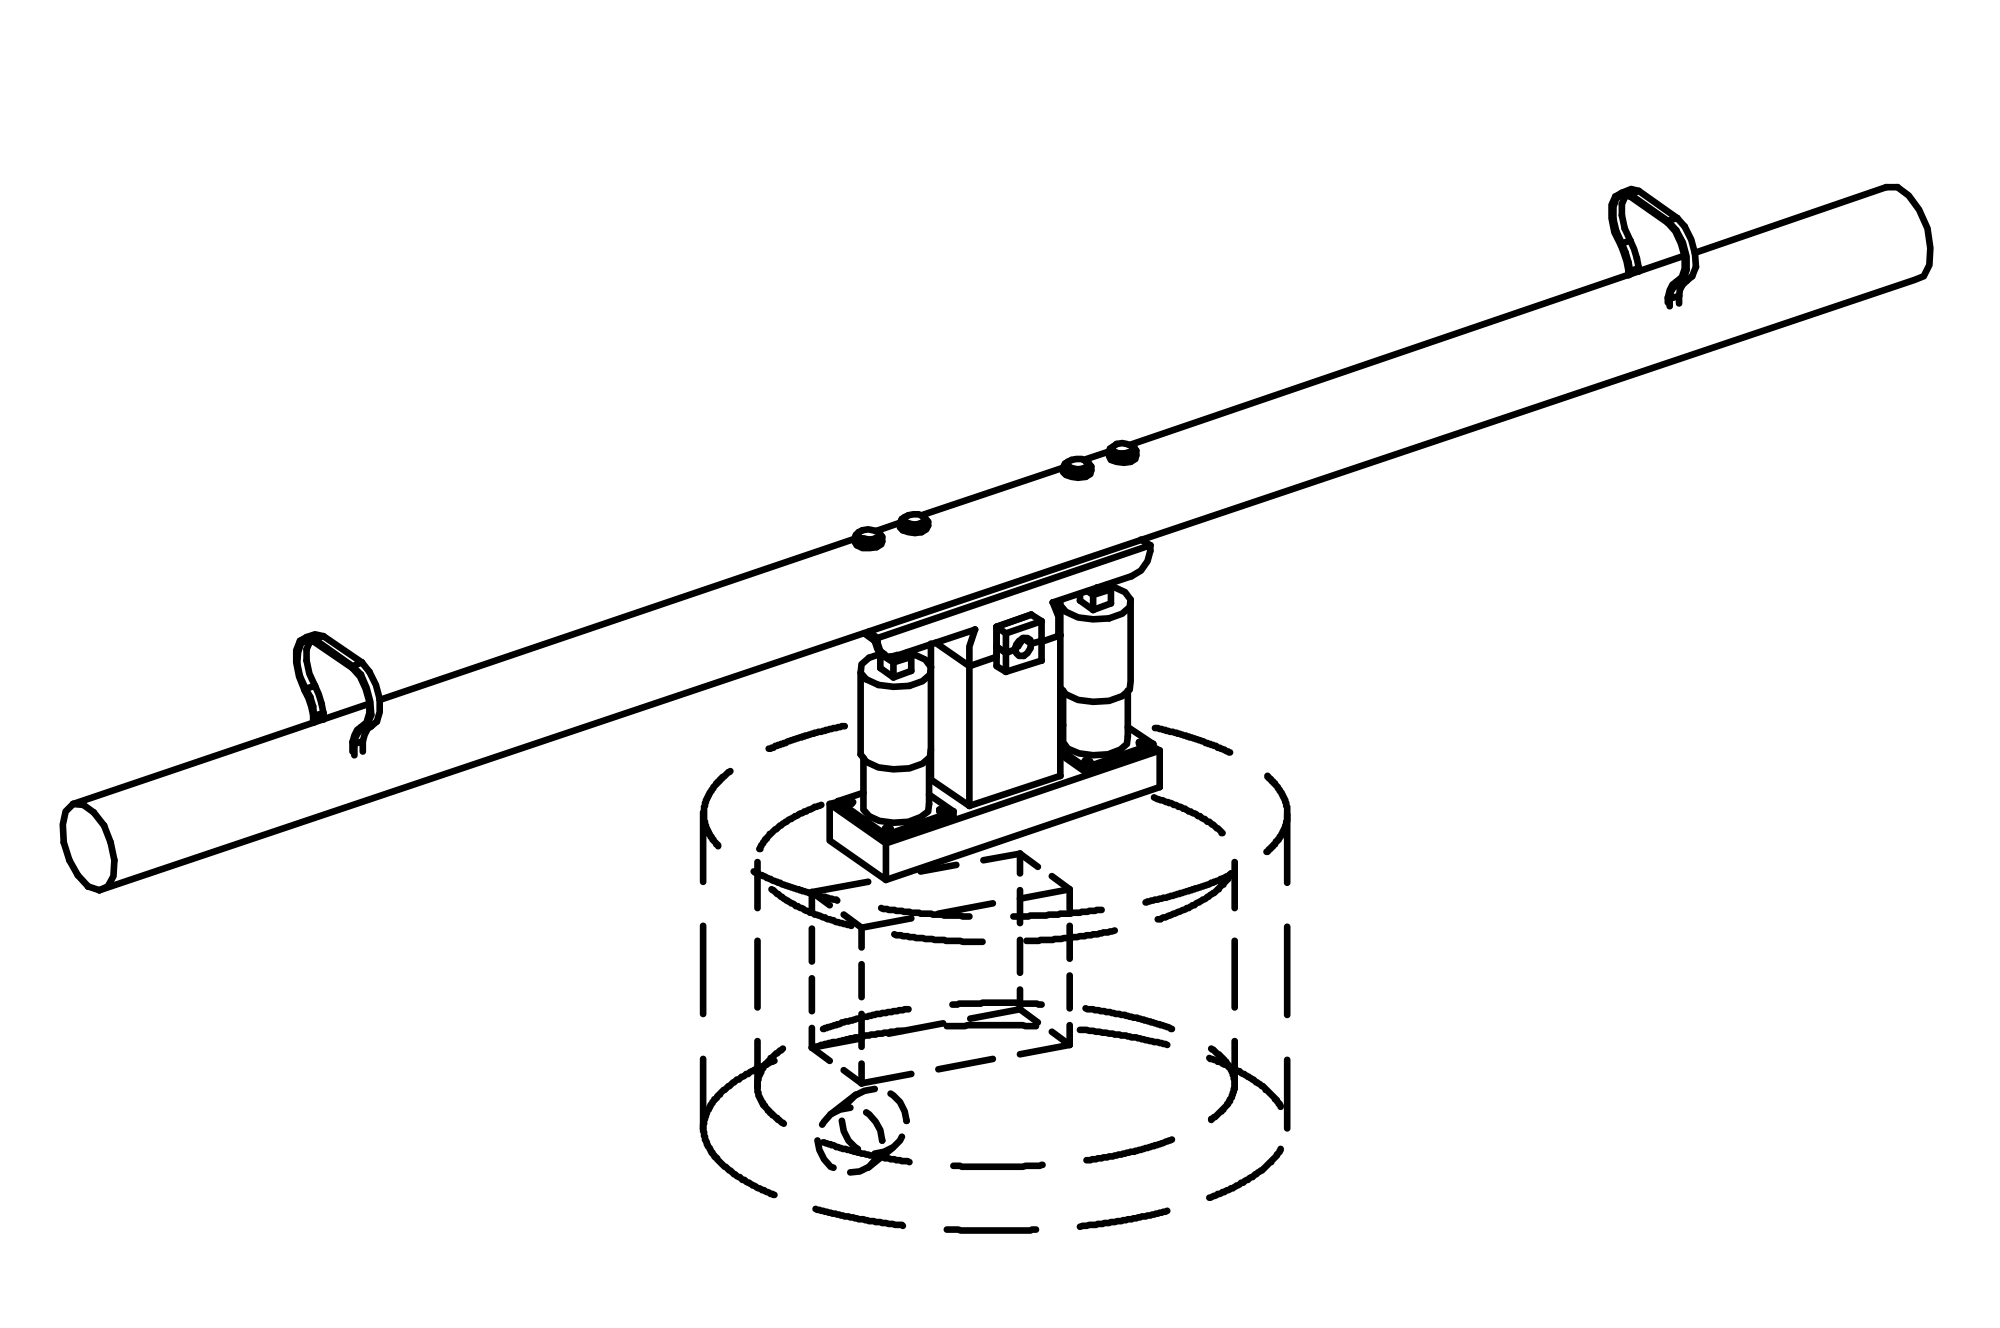 Pump See-sawwith valve assembly 